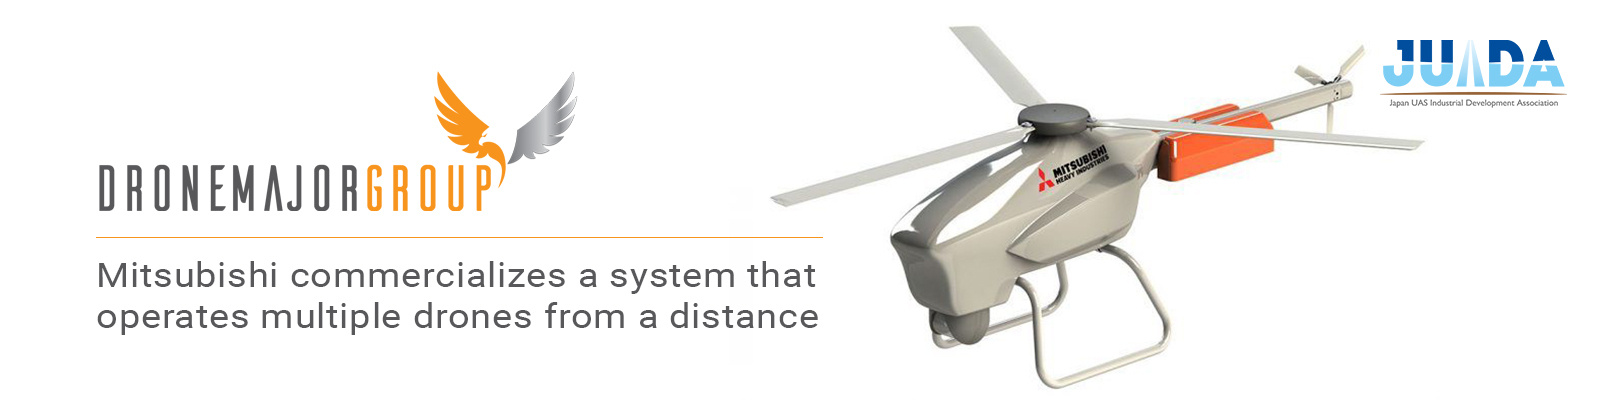 Mitsubishi Heavy Industries will commercialize a system that can operate multiple drones from a distance of 1,000km by 2022.